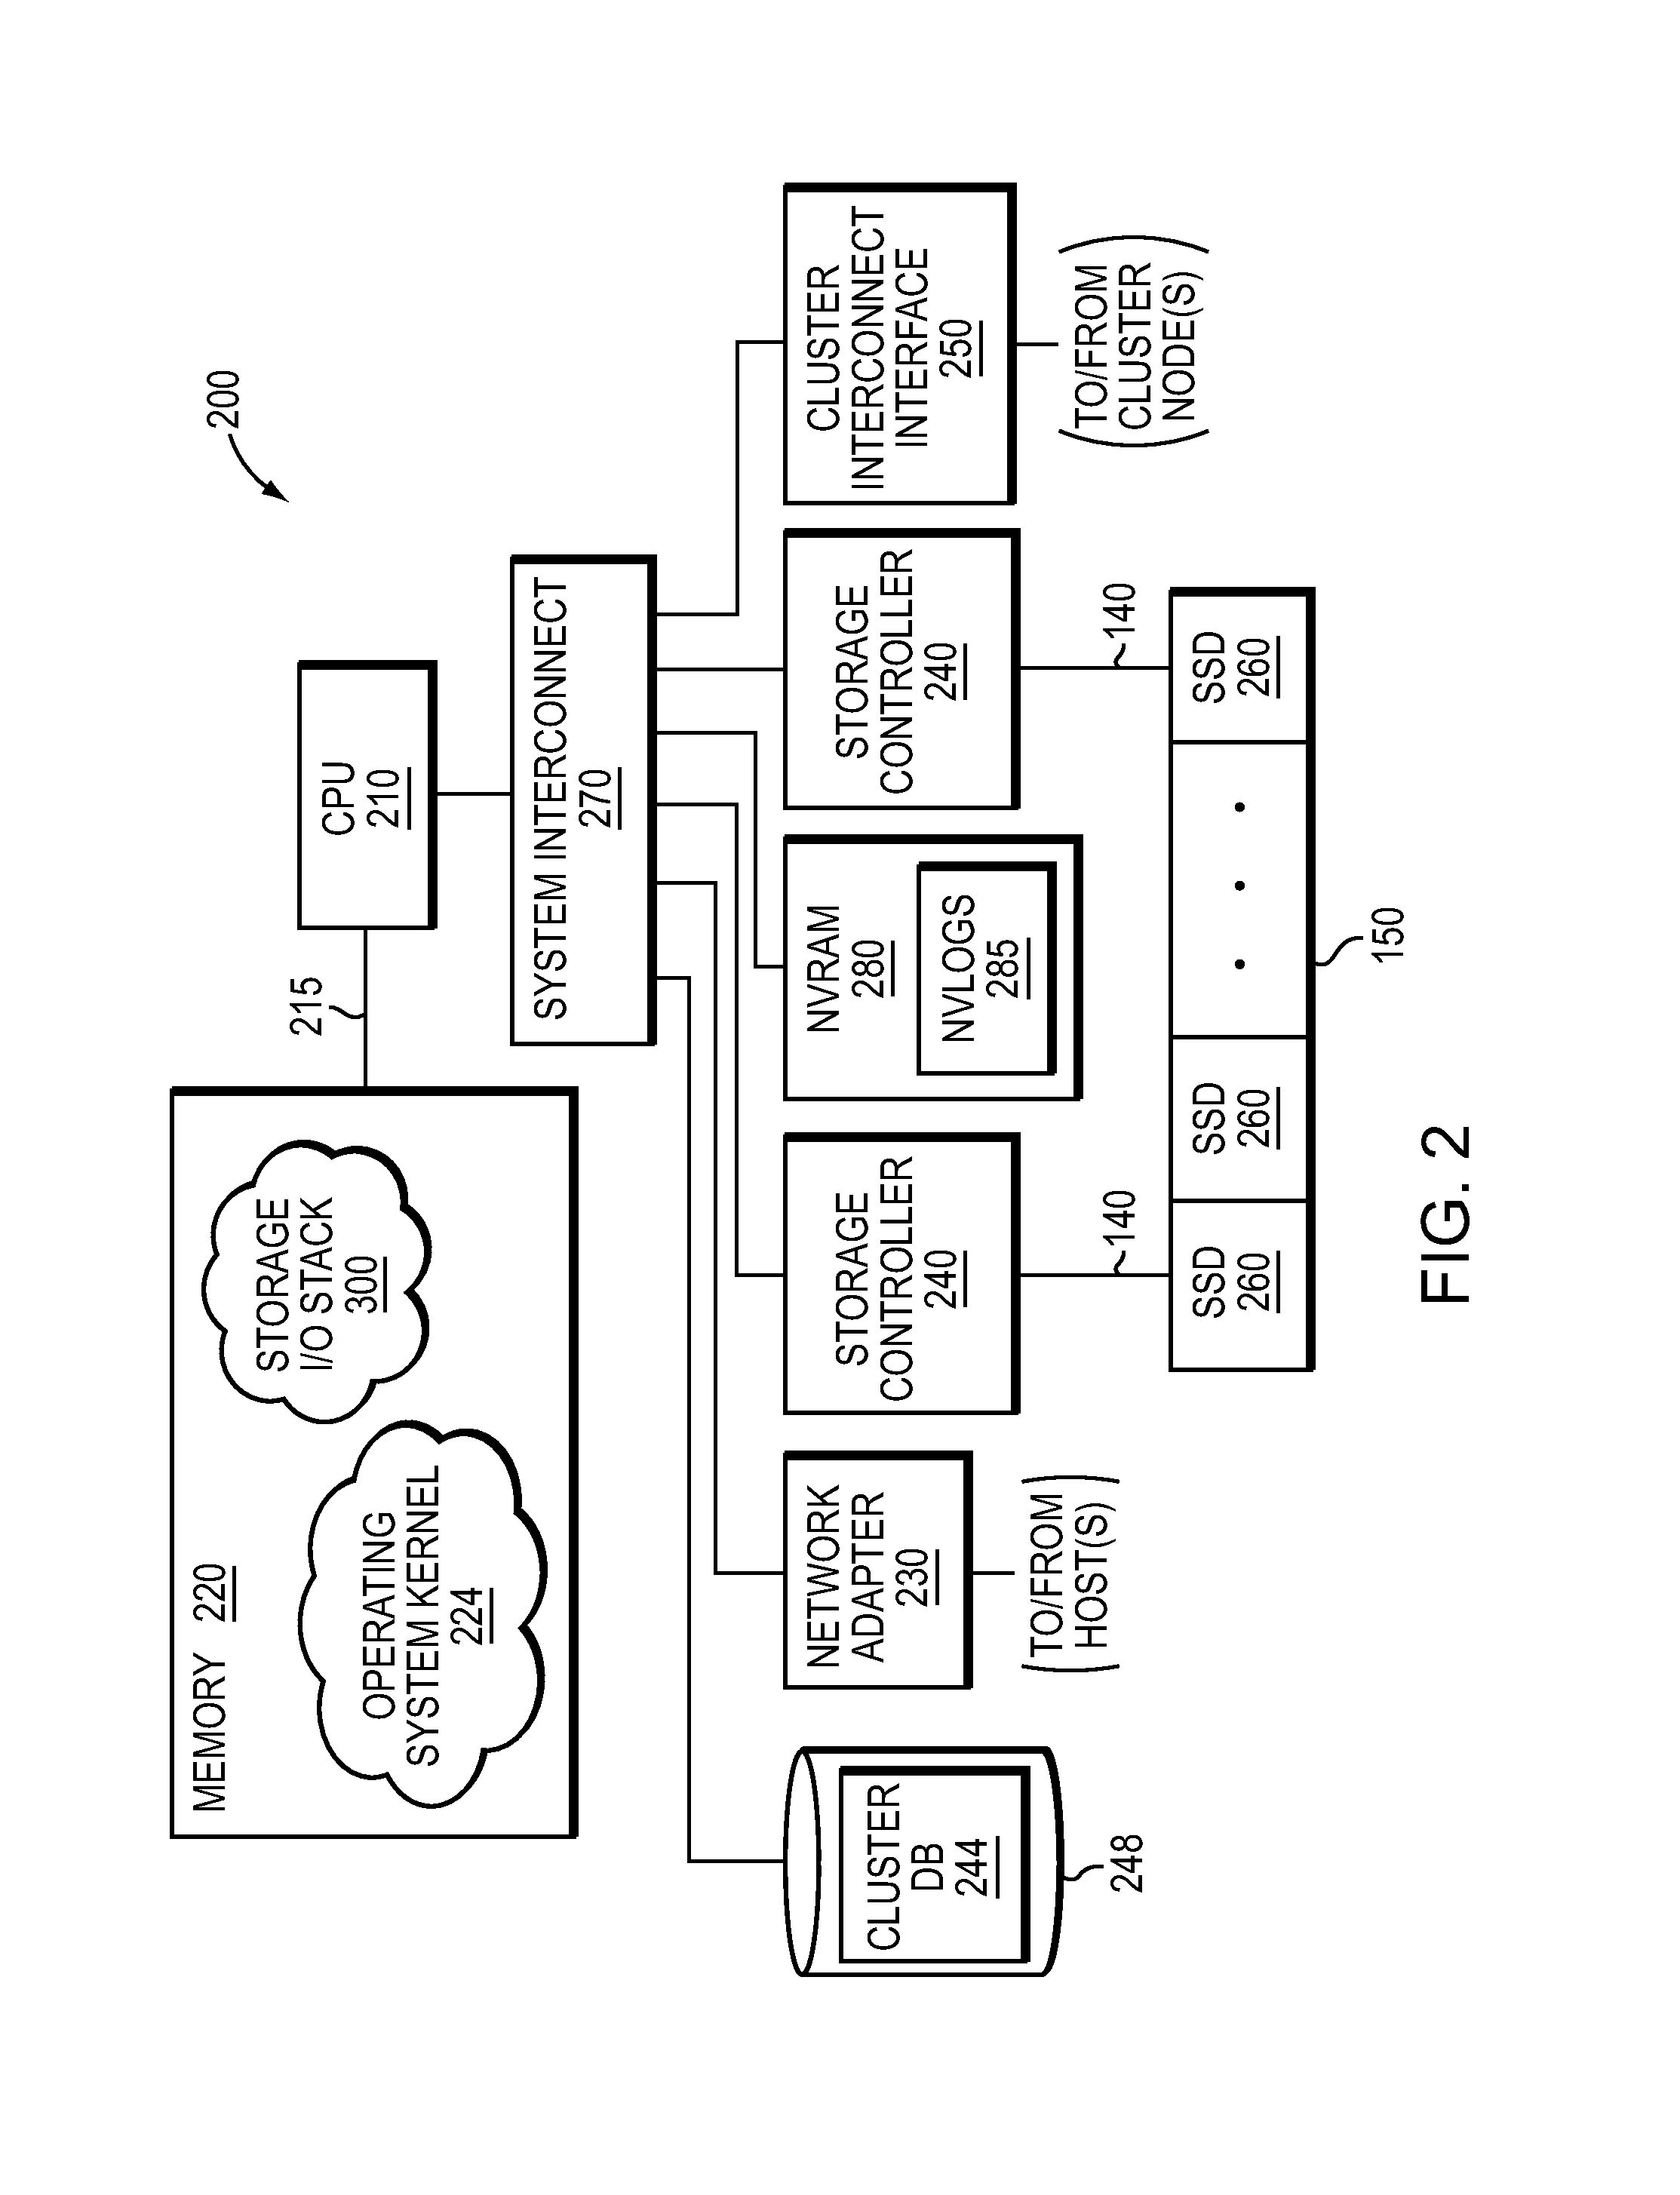 Flash optimized, log-structured layer of a file system